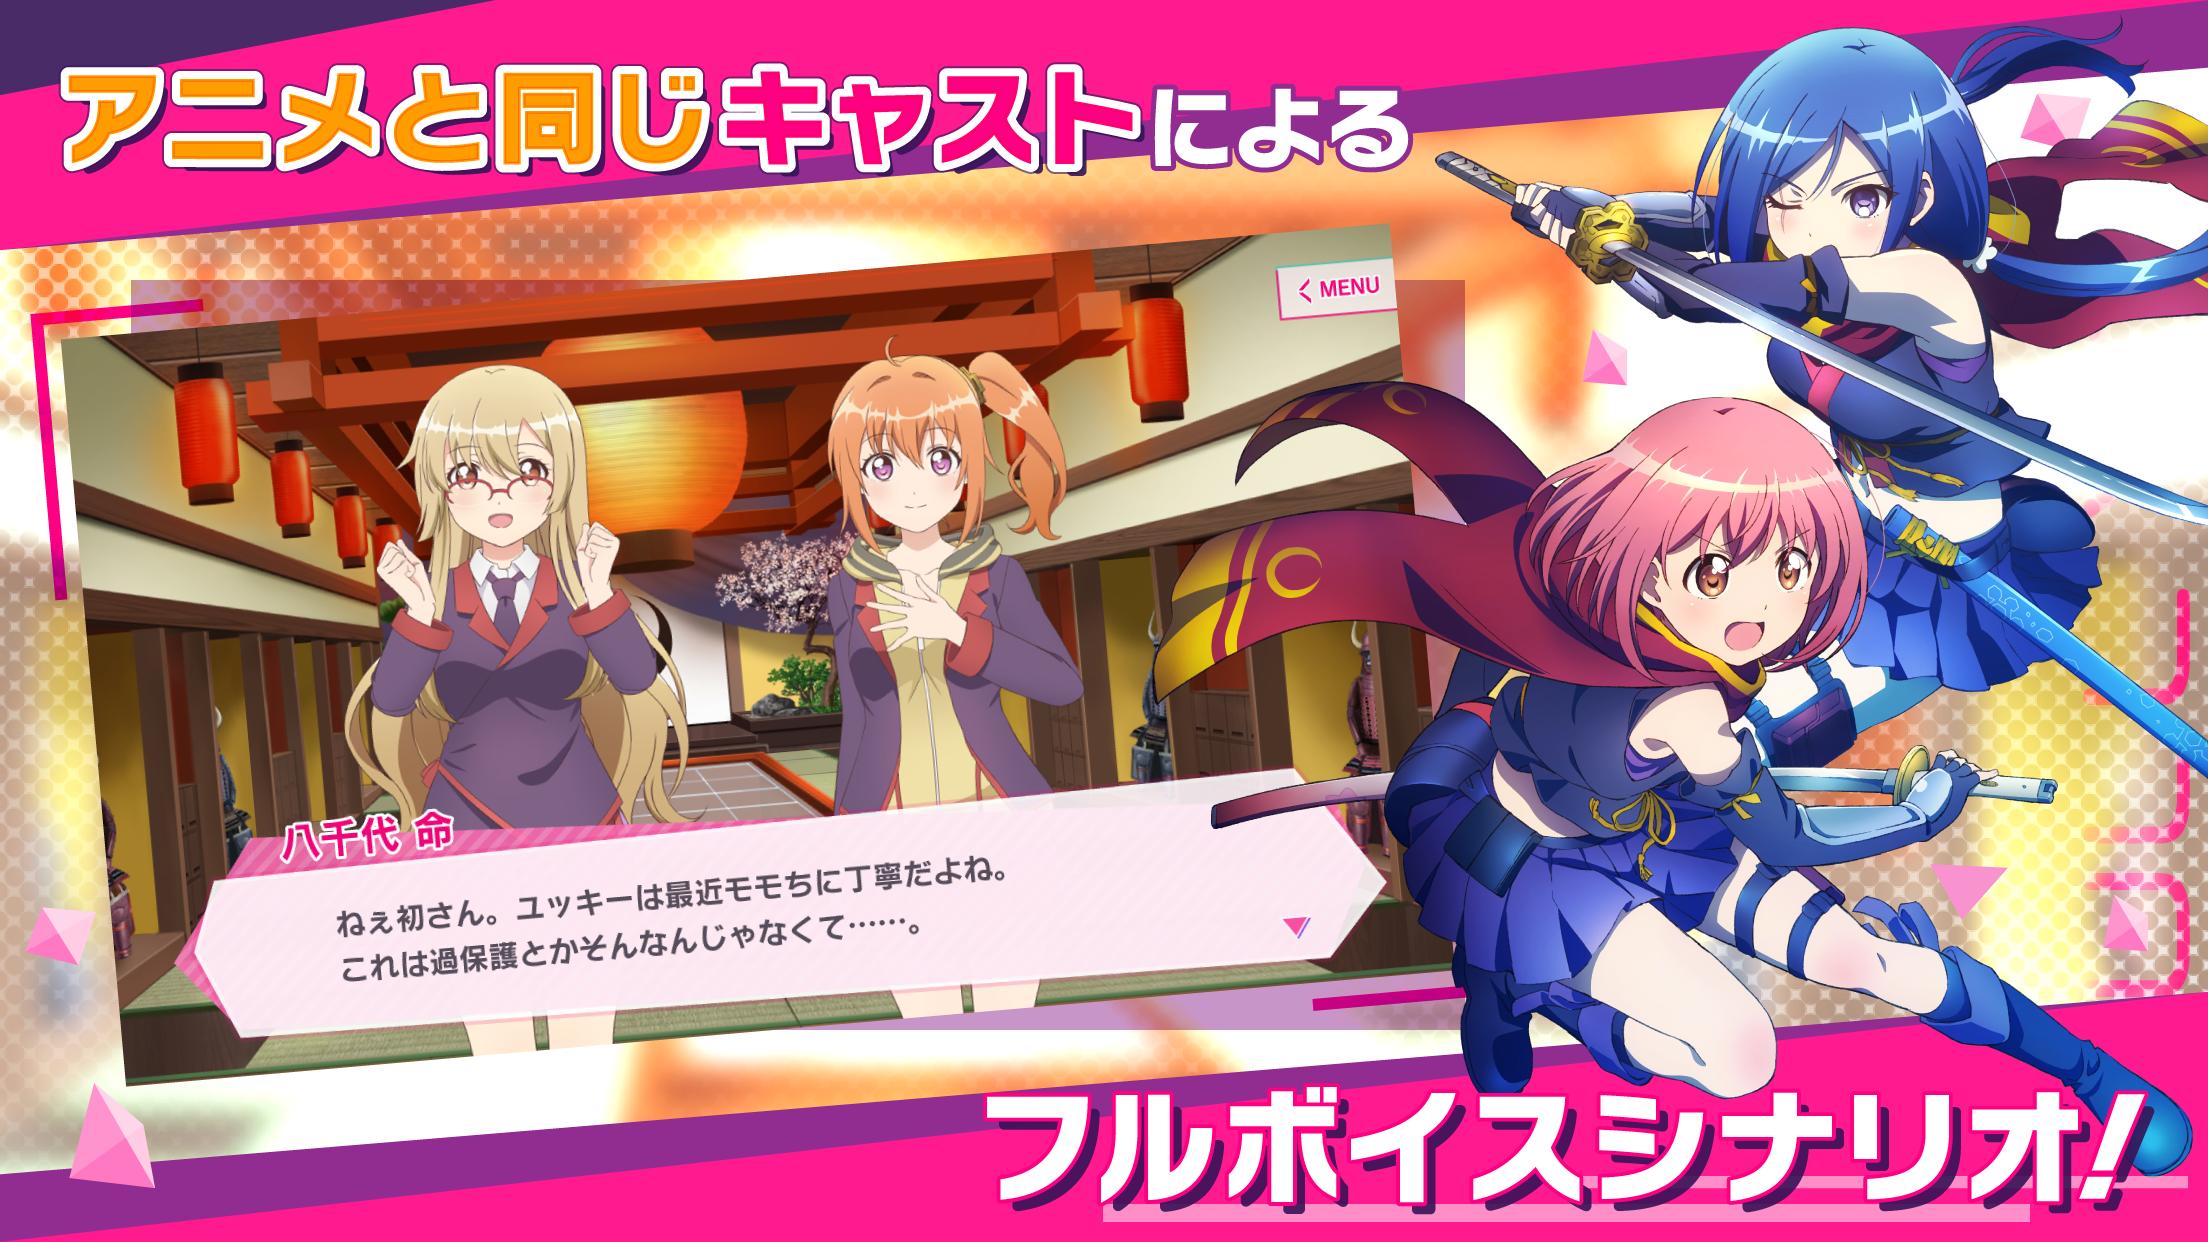 Release The Spyce Sf リリフレ For Android Apk Download